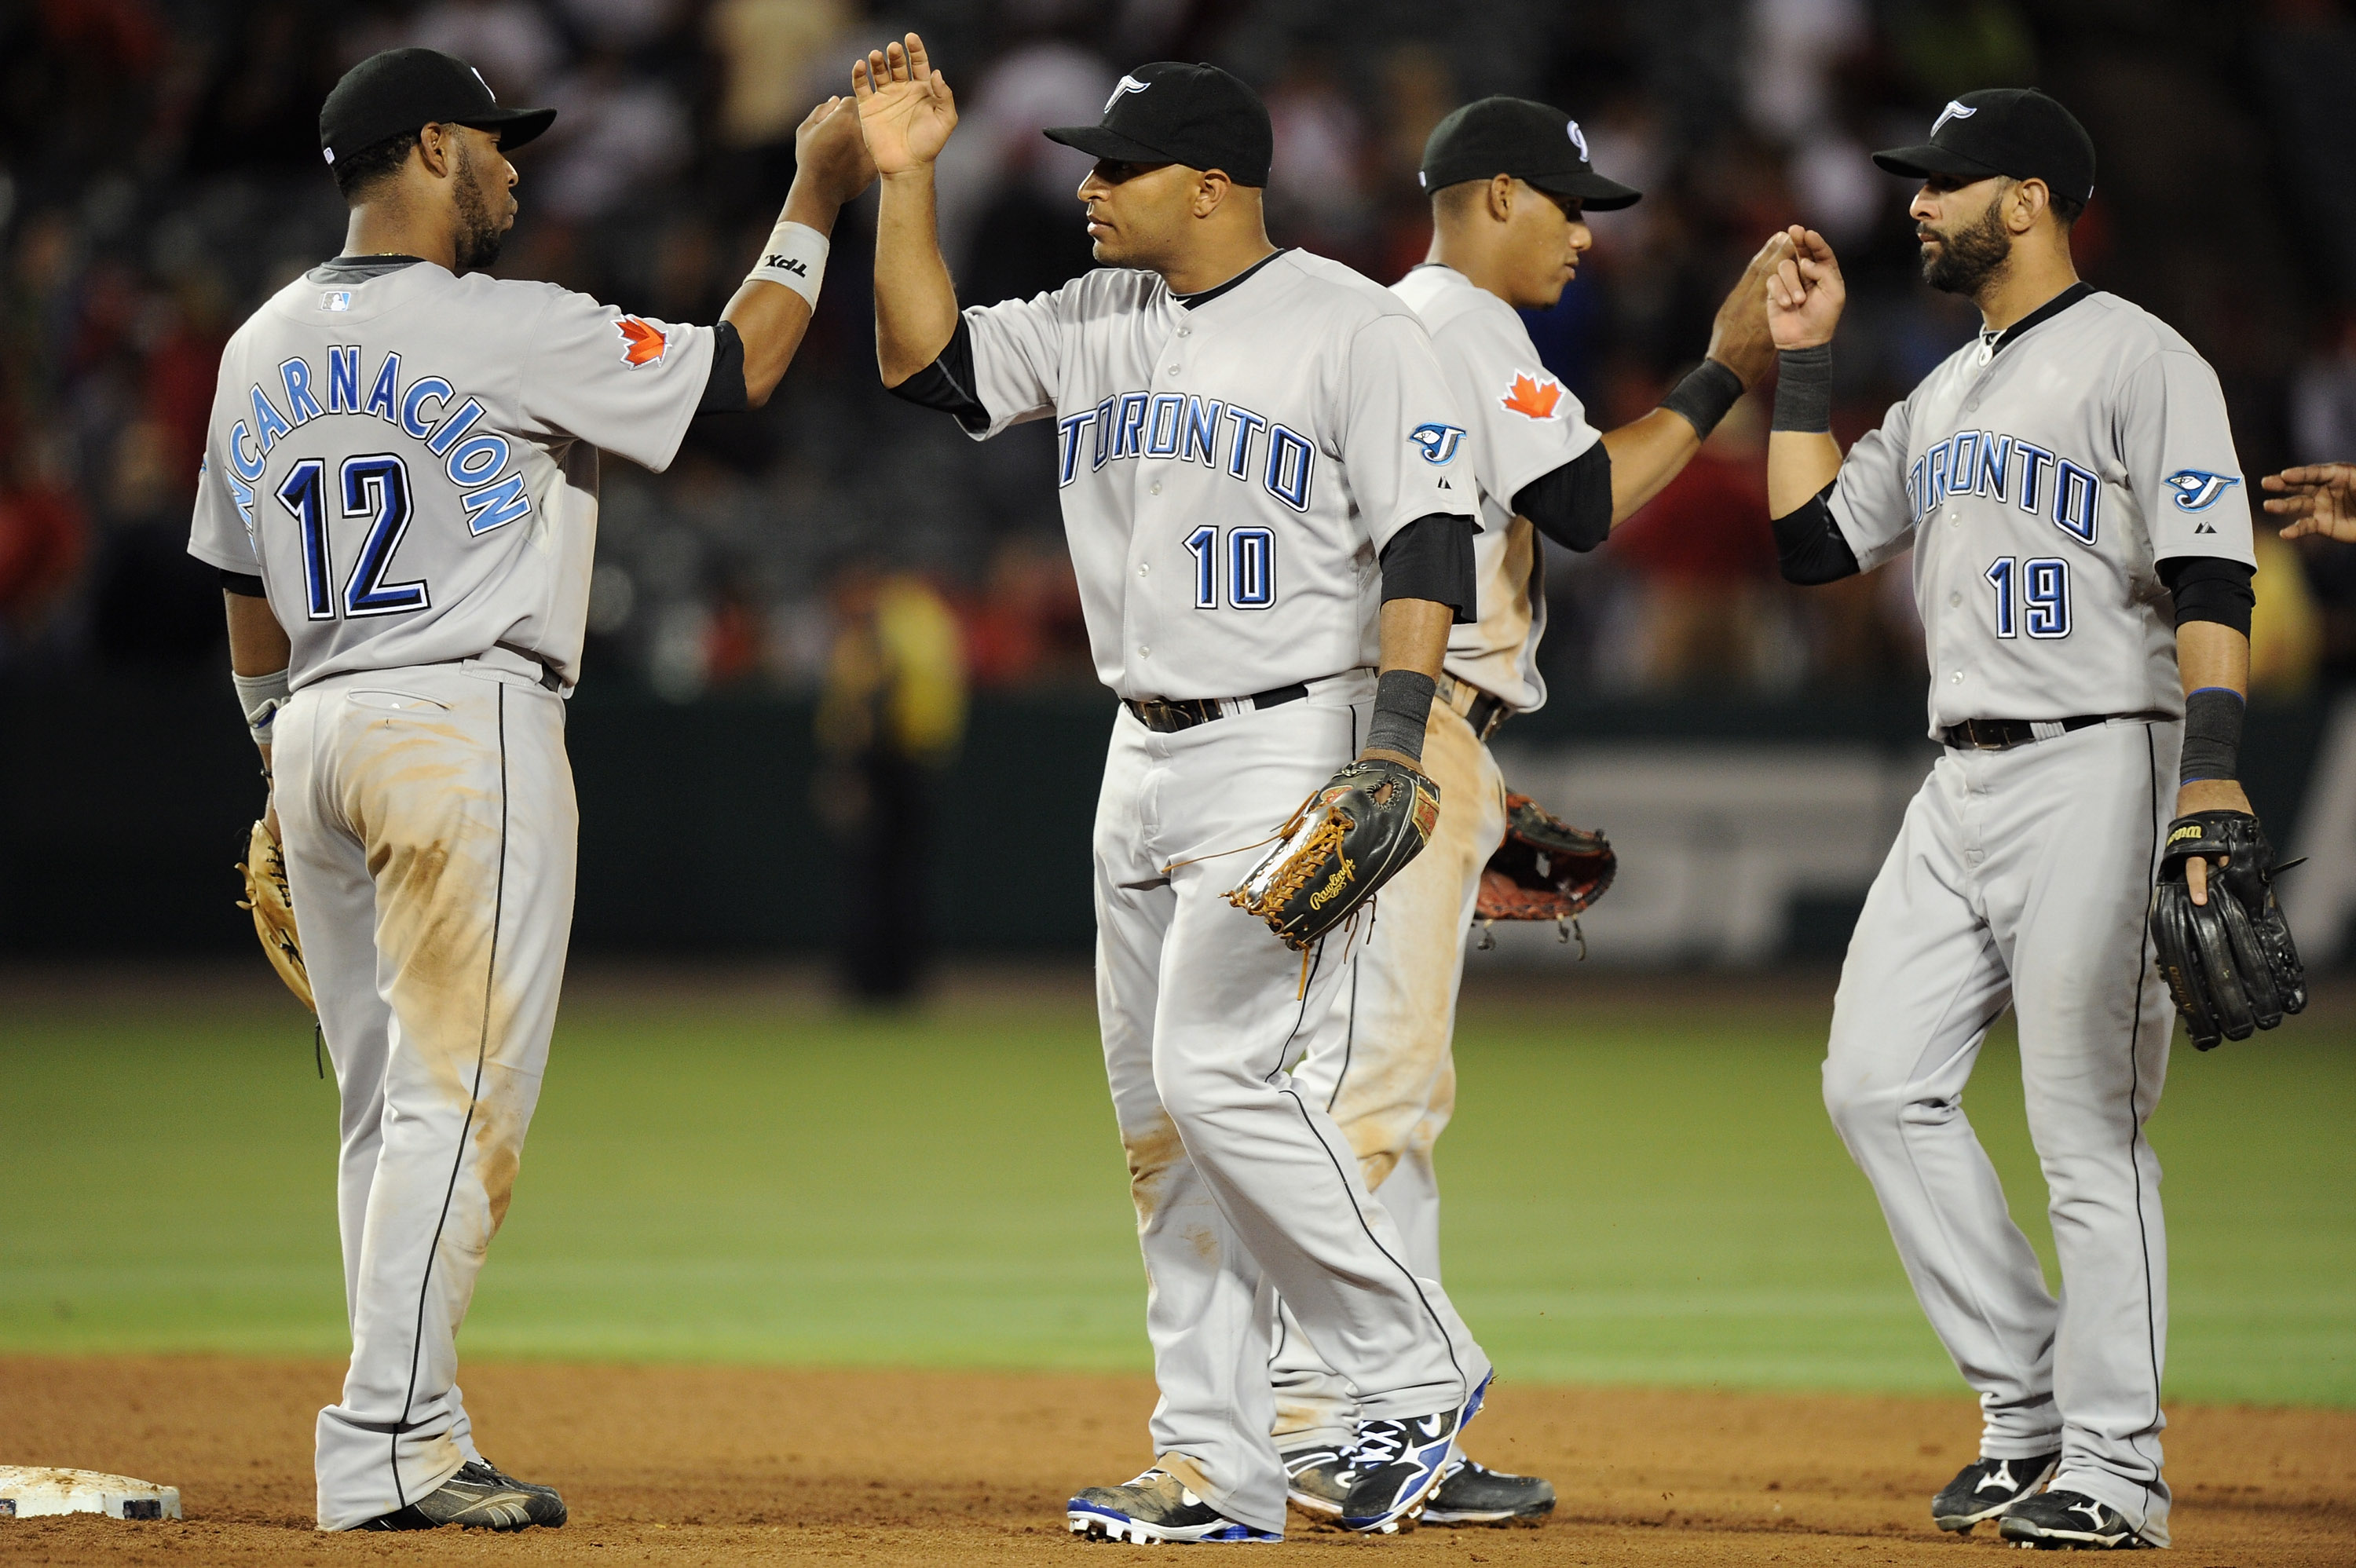 ANAHEIM, CA - AUGUST 13:  Vernon Wells #10, Edwin Encarnacion #12 Jose Bautista and Yunel Escobar #5 of the Toronto Blue Jays celebrate a 3-0 win over the Los Angeles Angels at Angel Stadium on August 13, 2010 in Anaheim, California.  (Photo by Harry How/